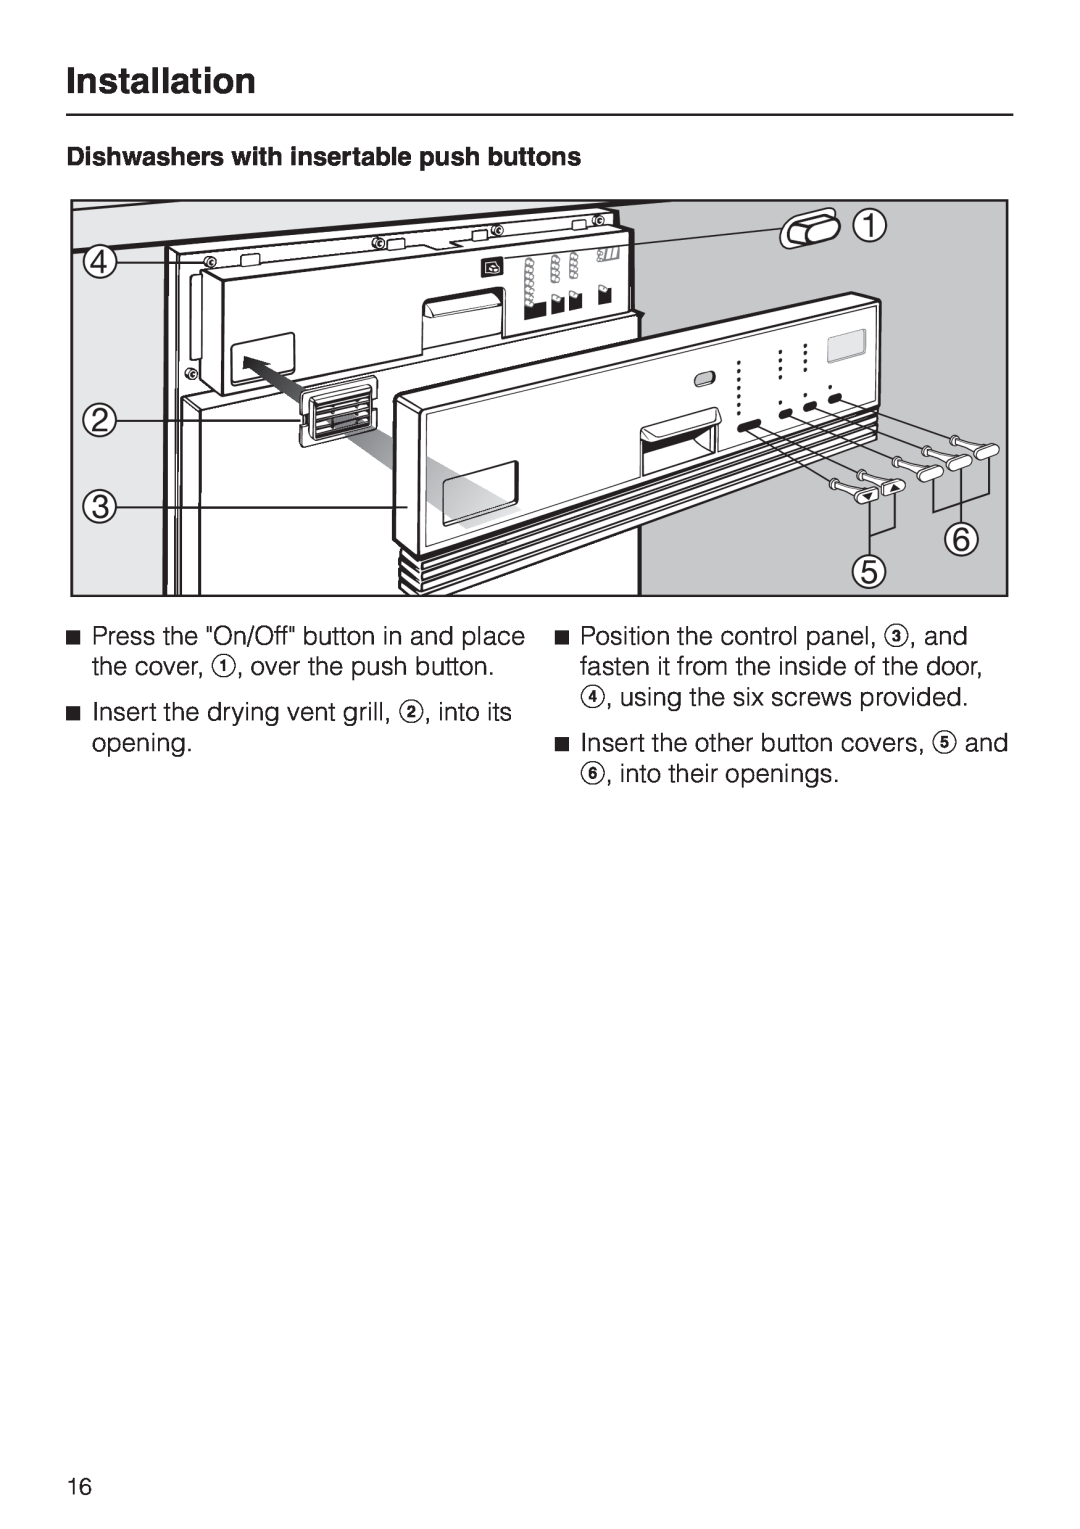 Miele HG02 installation instructions Dishwashers with insertable push buttons, Installation 